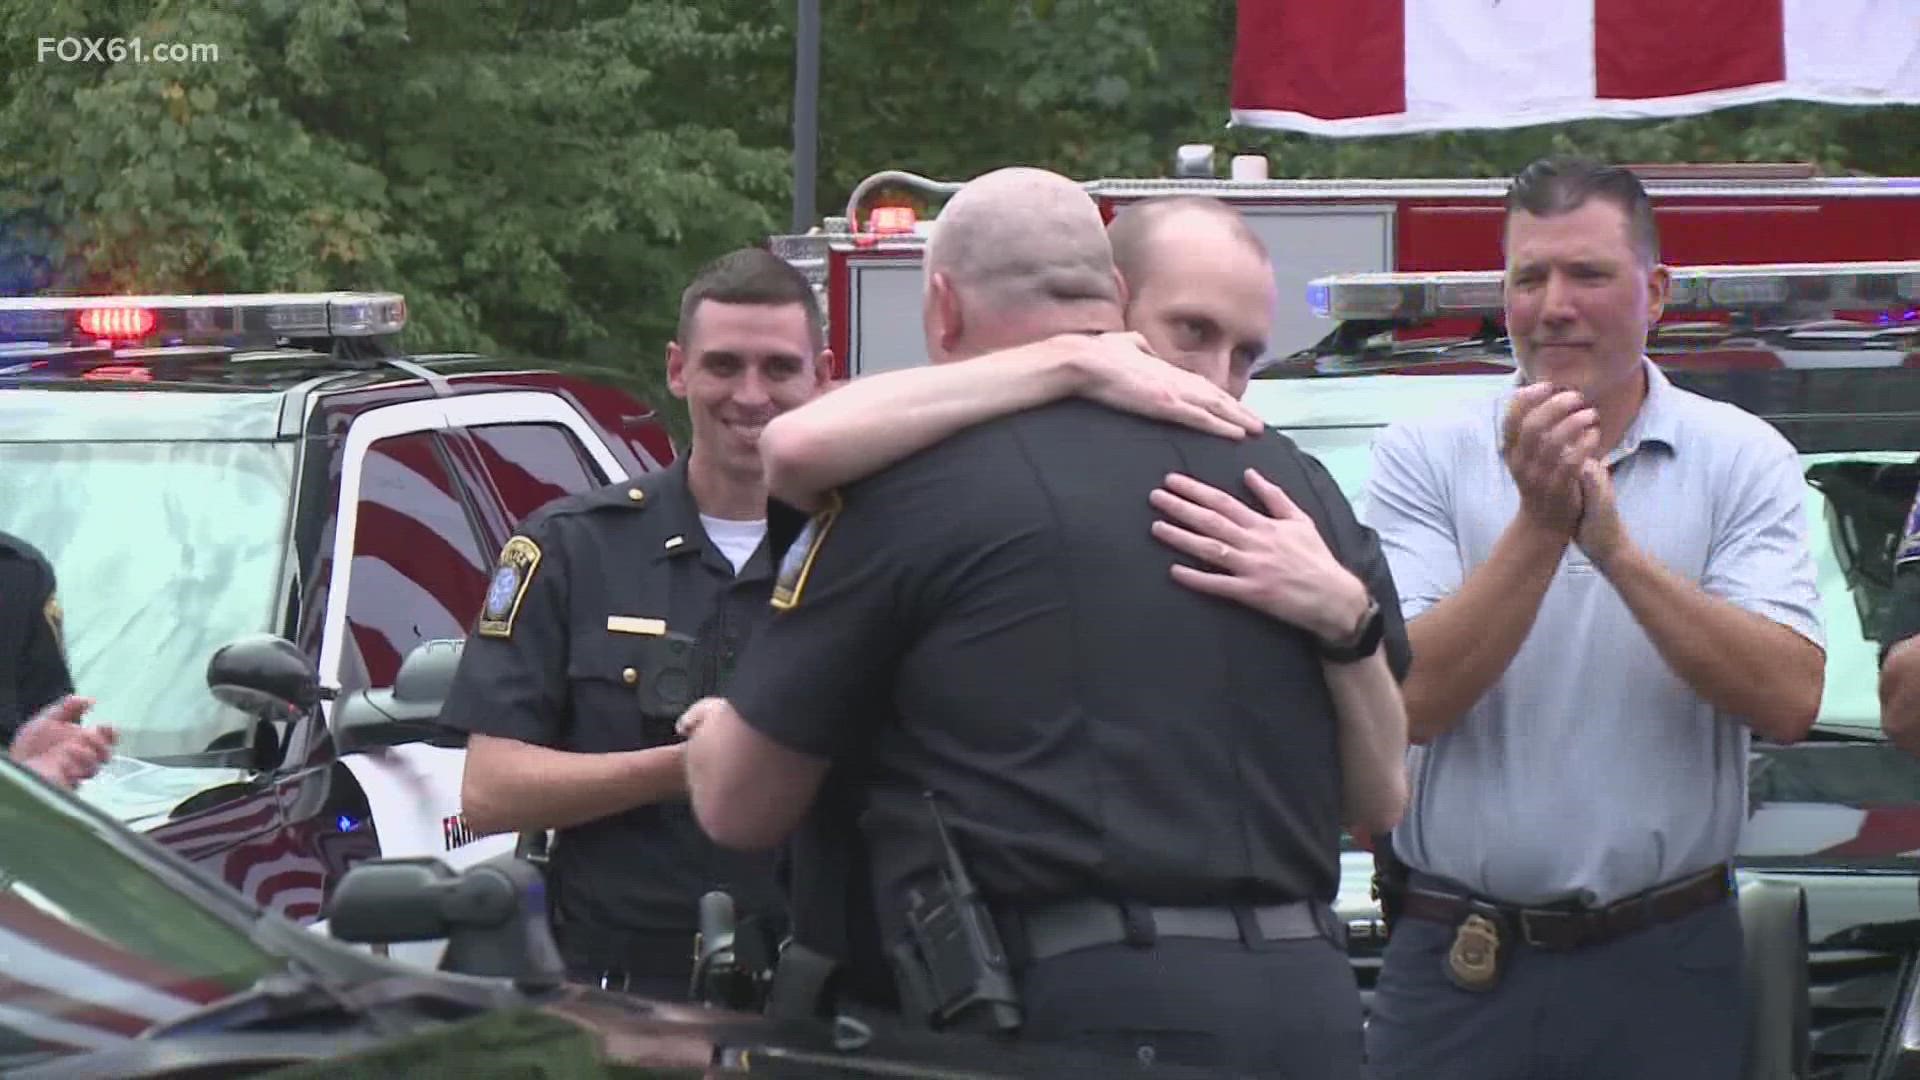 The Farmington police officer was welcomed back with a showing of support after taking a year off to recover.